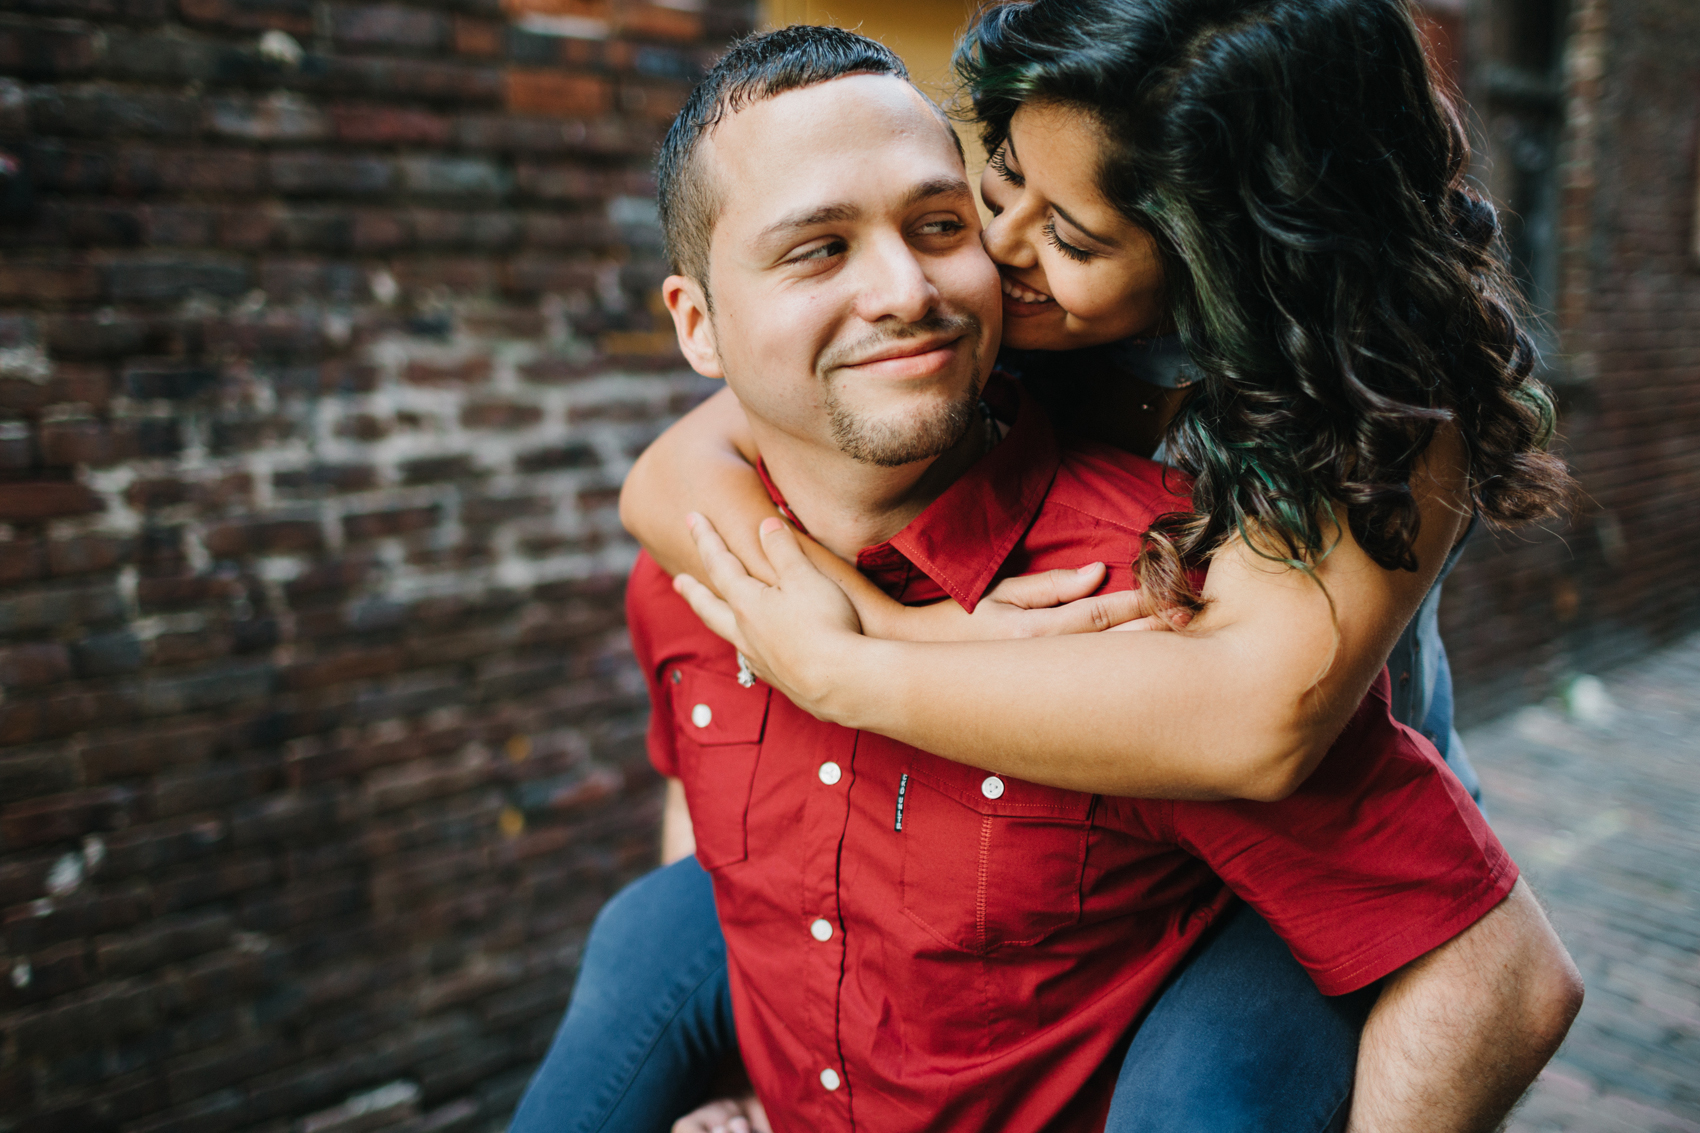 natural candid engagement photography and wedding photography in ybor city, florida